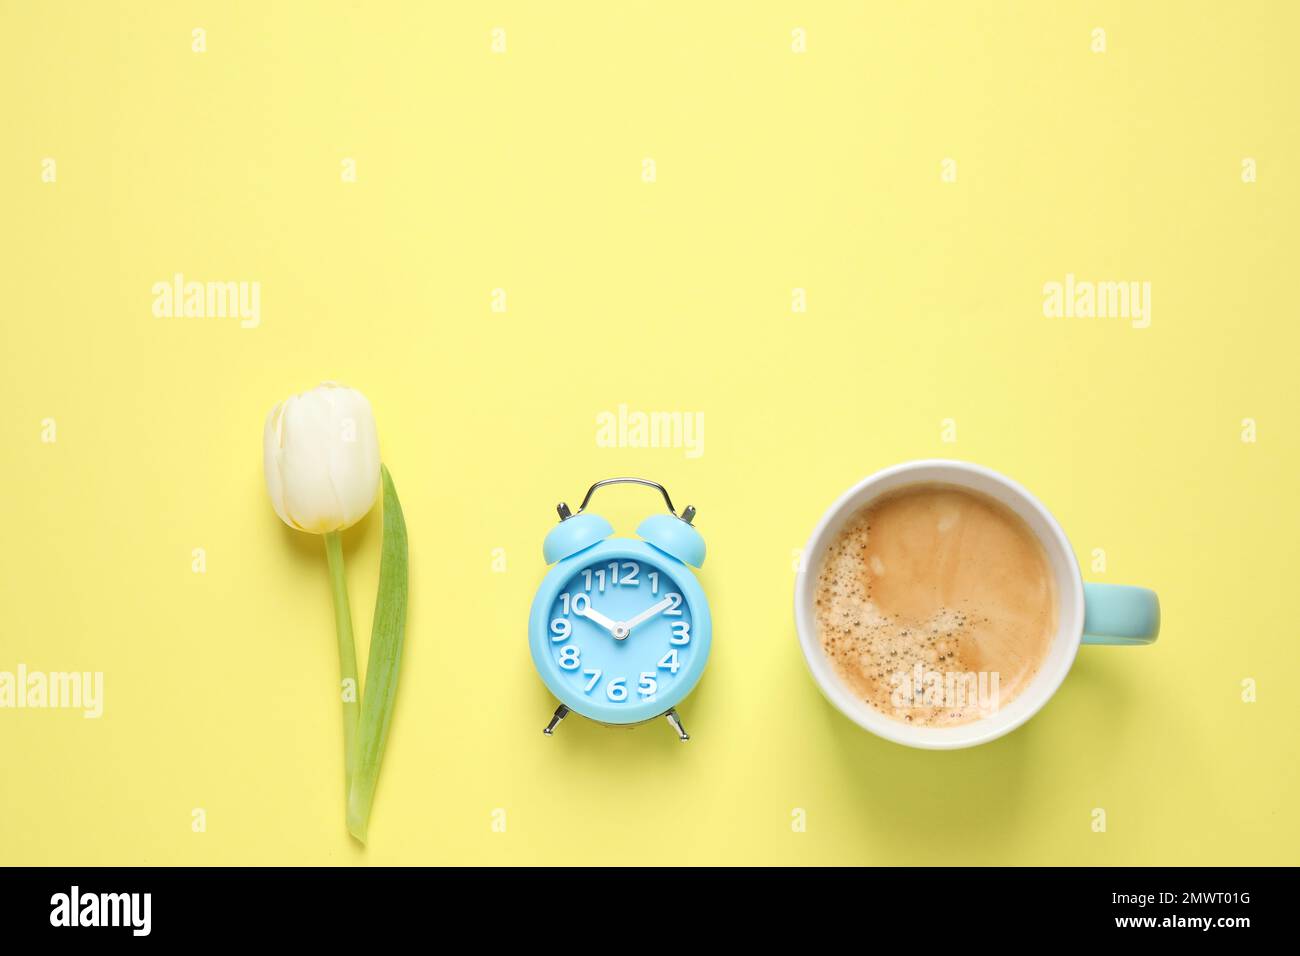 https://c8.alamy.com/comp/2MWT01G/white-tulip-alarm-clock-and-coffee-on-yellow-background-flat-lay-with-space-for-text-good-morning-2MWT01G.jpg